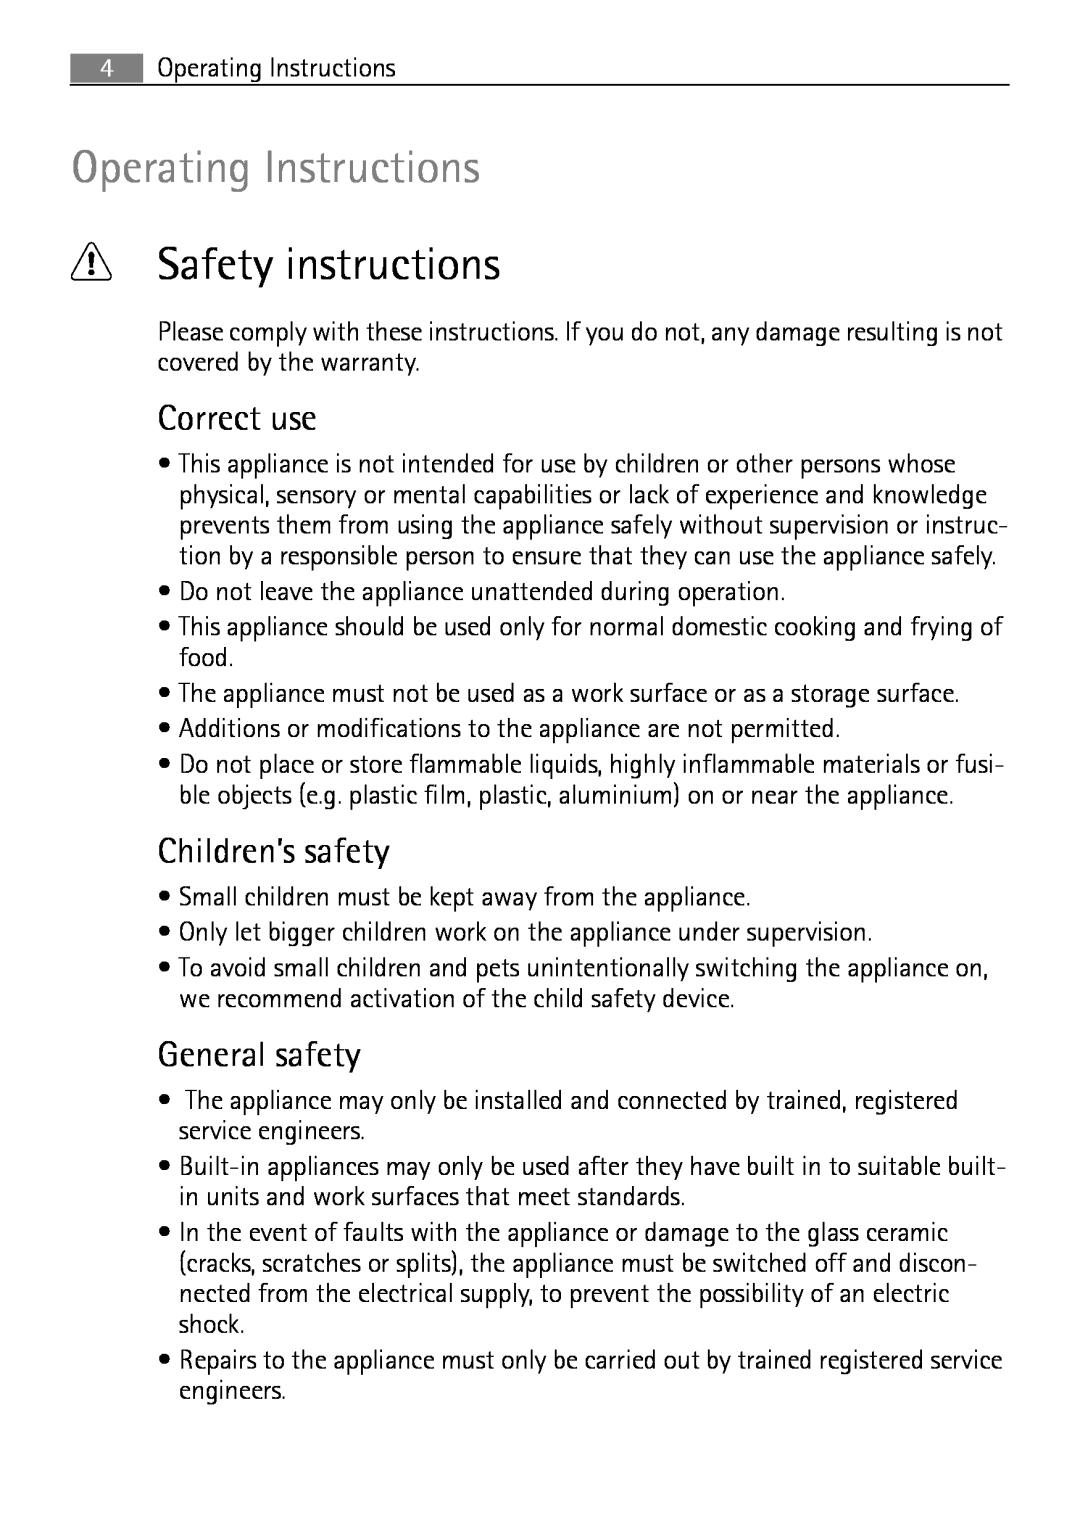 Electrolux 66331KF-N Operating Instructions, Safety instructions, Correct use, Children’s safety, General safety 